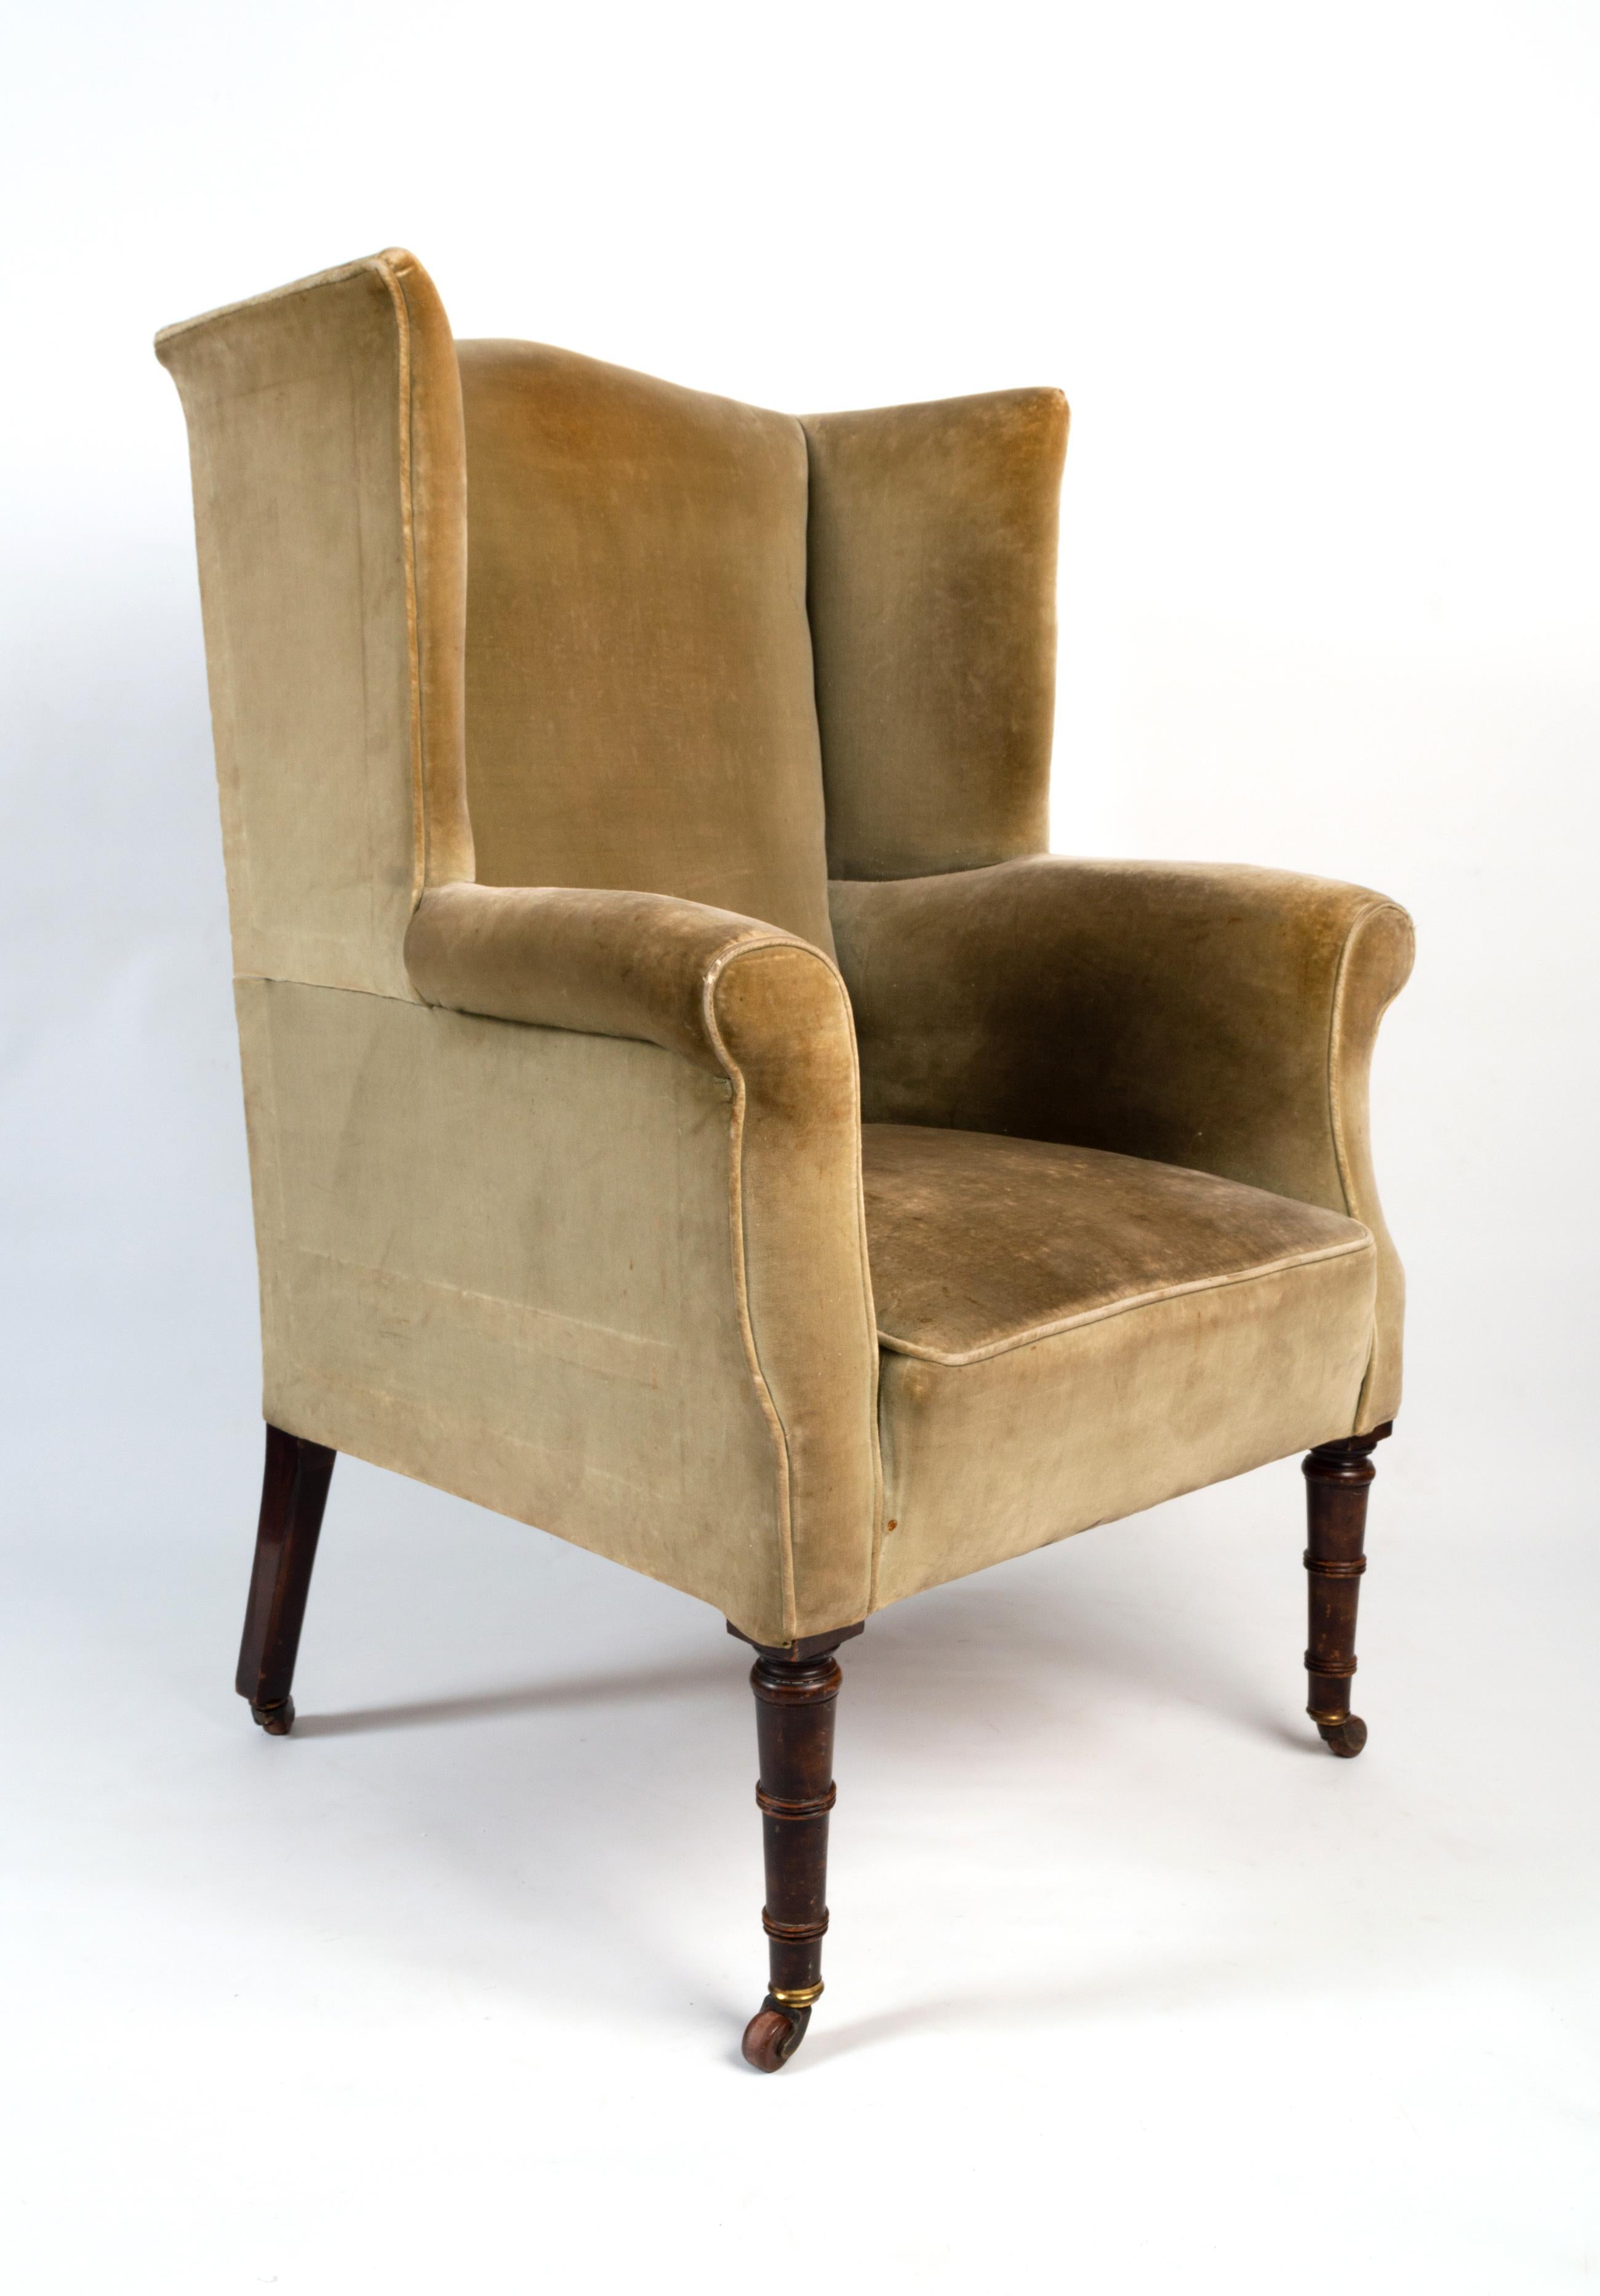 Antique English Regency Wing Armchair circa 1820
Good example in excellent condition commensurate of age. Fabric will require replacing. Standing on mahogany faux bamboo legs terminating on original brass castors.